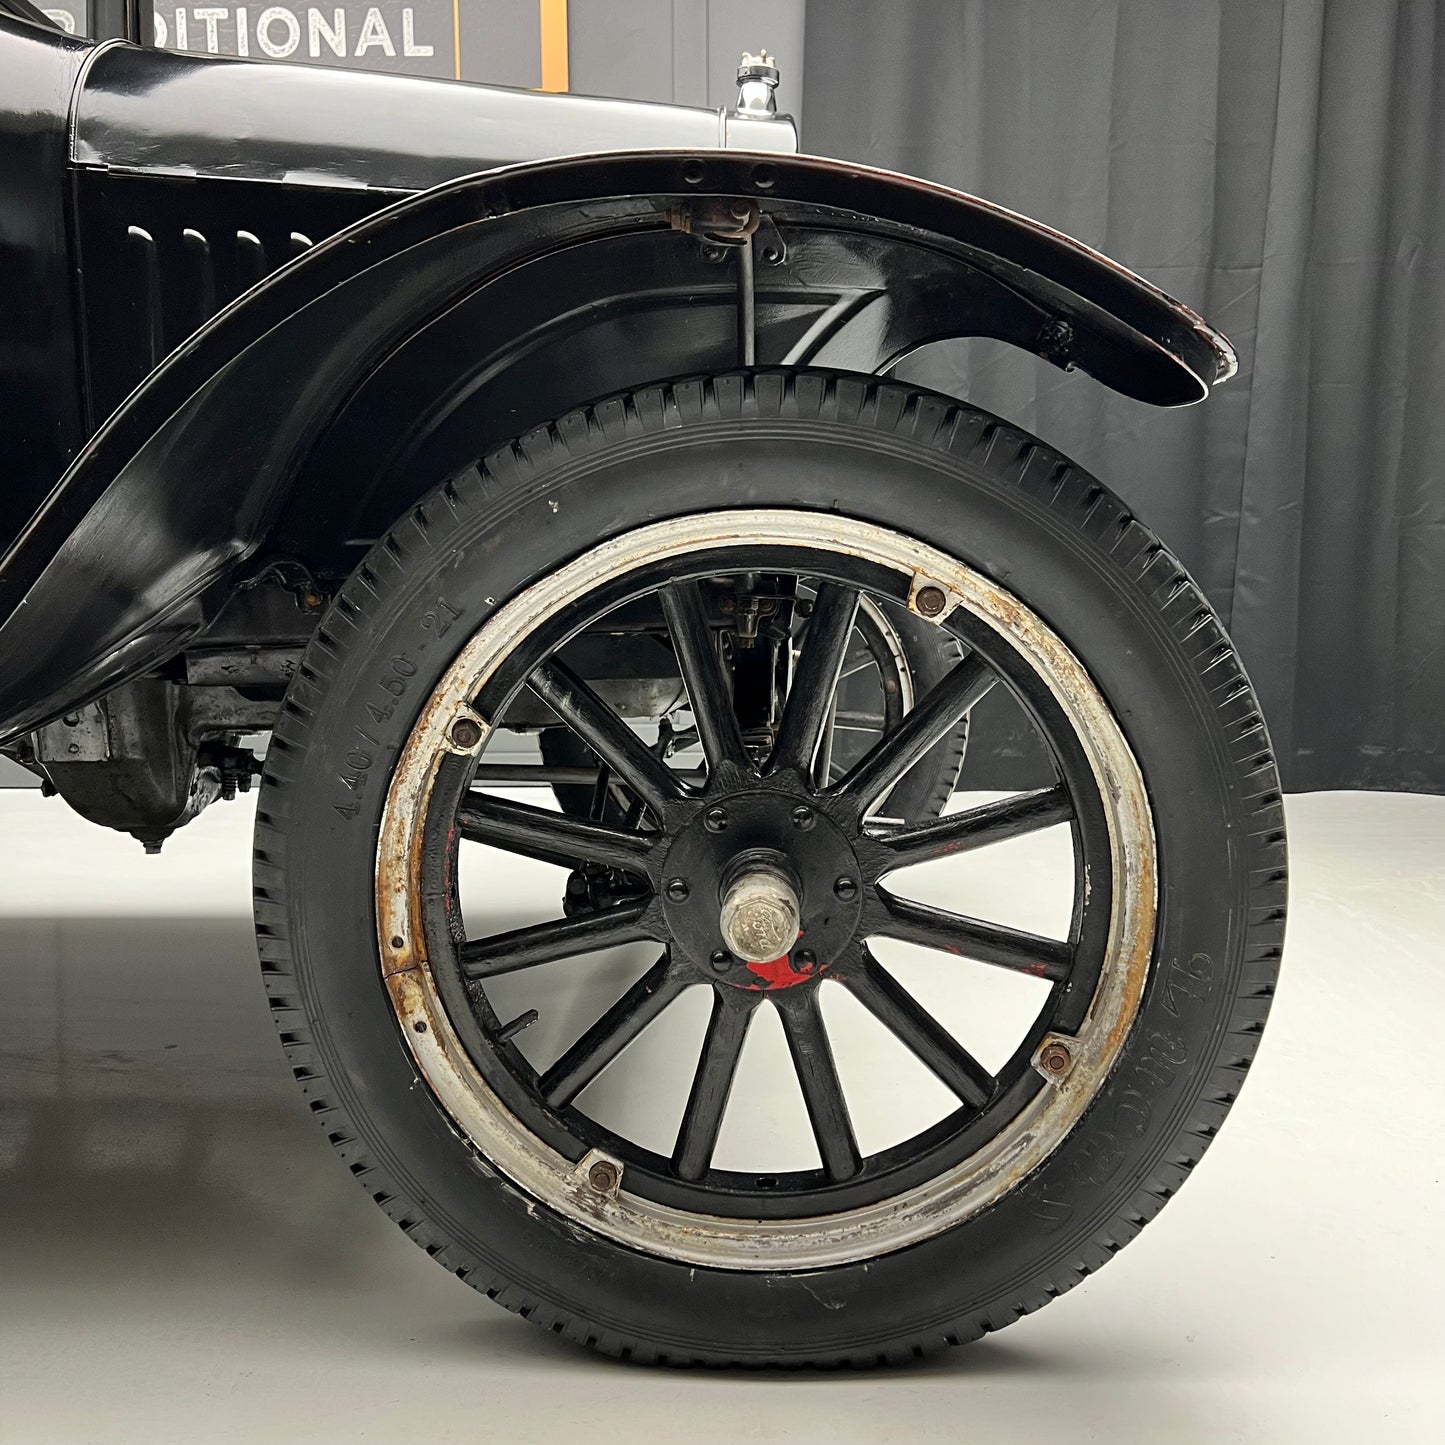 Load image into Gallery viewer, 1925 Ford Model T Dr Coupe